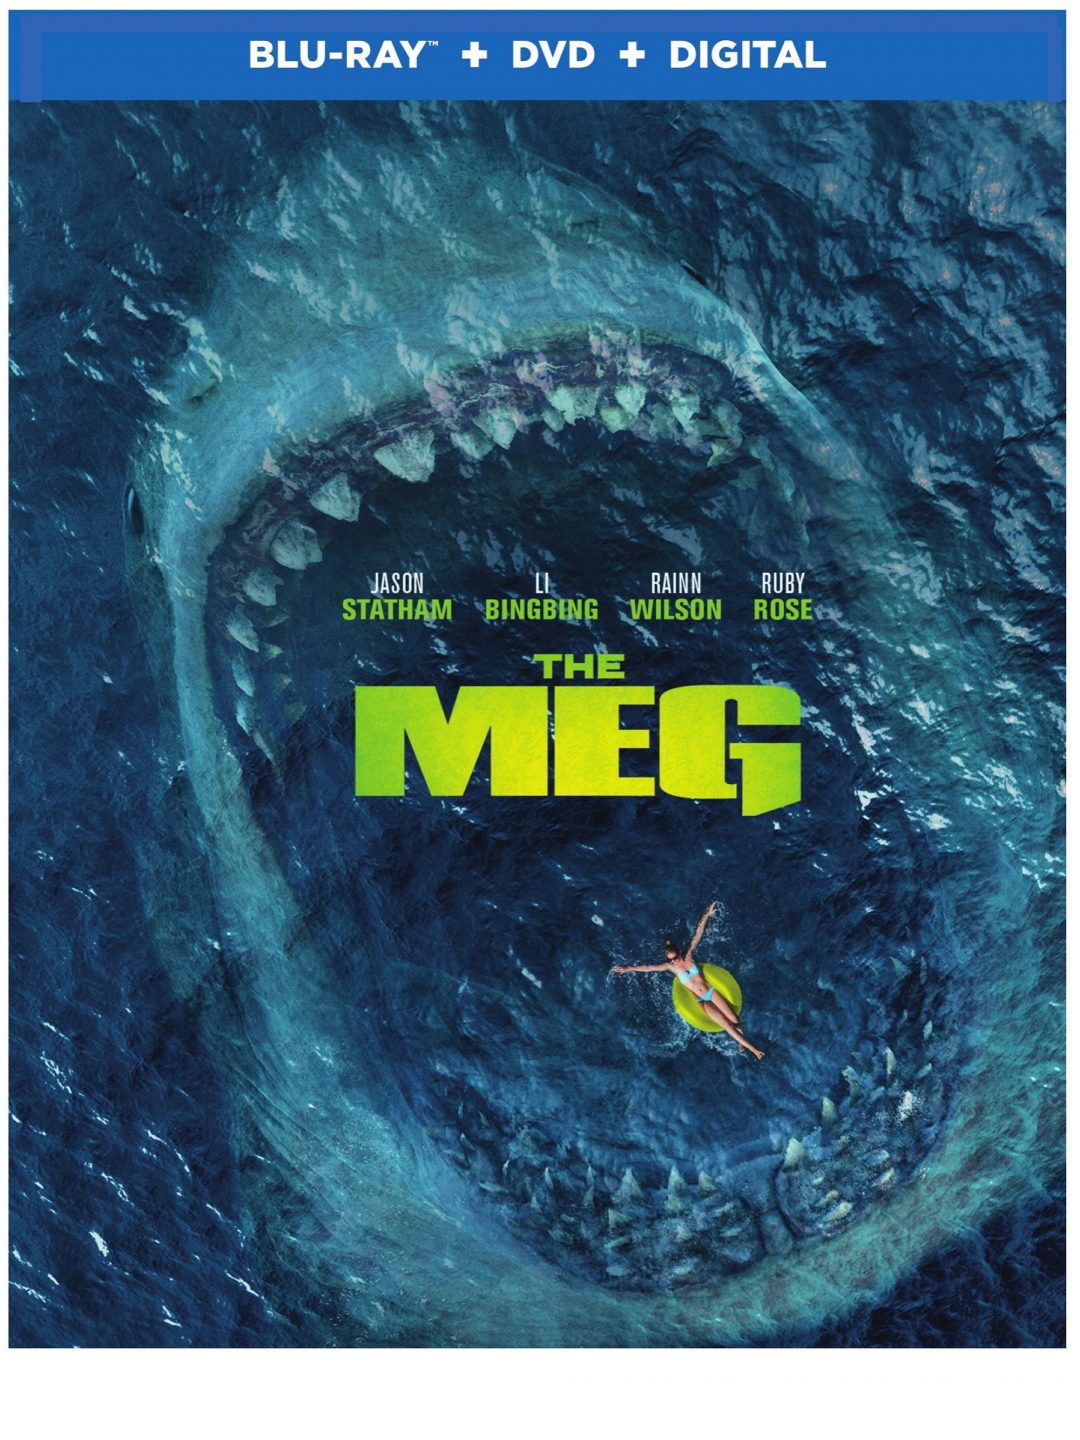 The Meg Blu-Ray Combo Pack cover (Warner Bros. Home Entertainment)